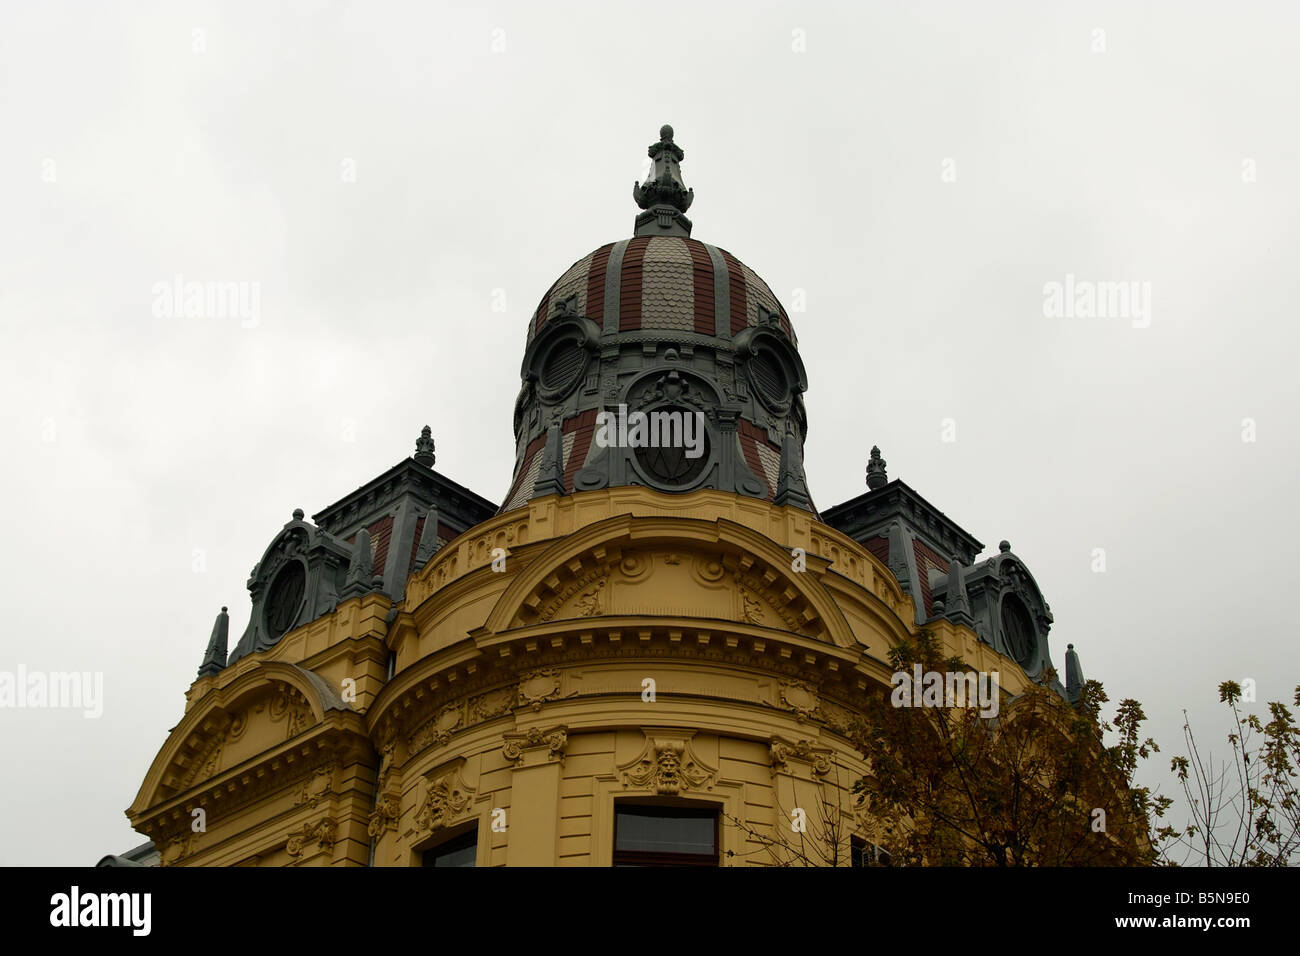 Detail of a historical building front in Croatia capital Zagreb Stock Photo